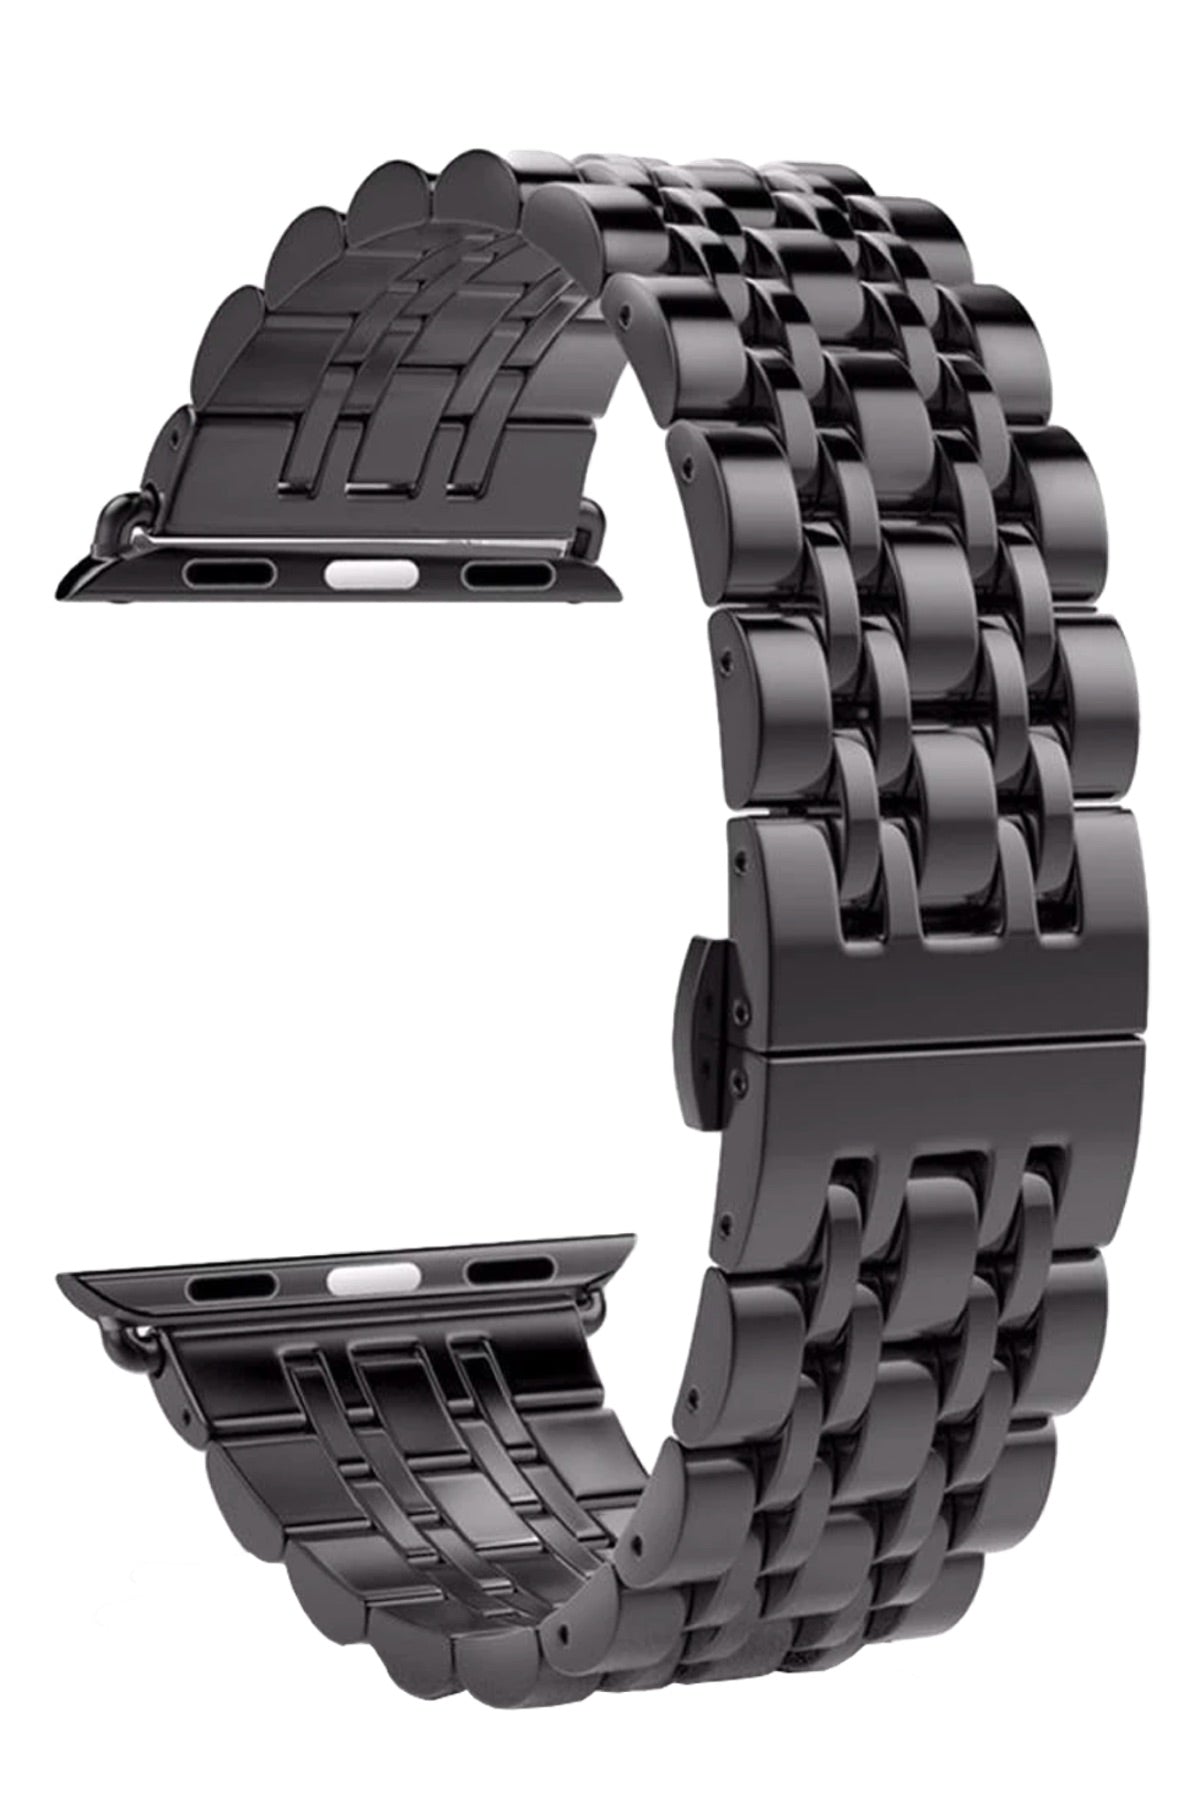 Apple Watch Compatible Classic Steel Loop Band Black 